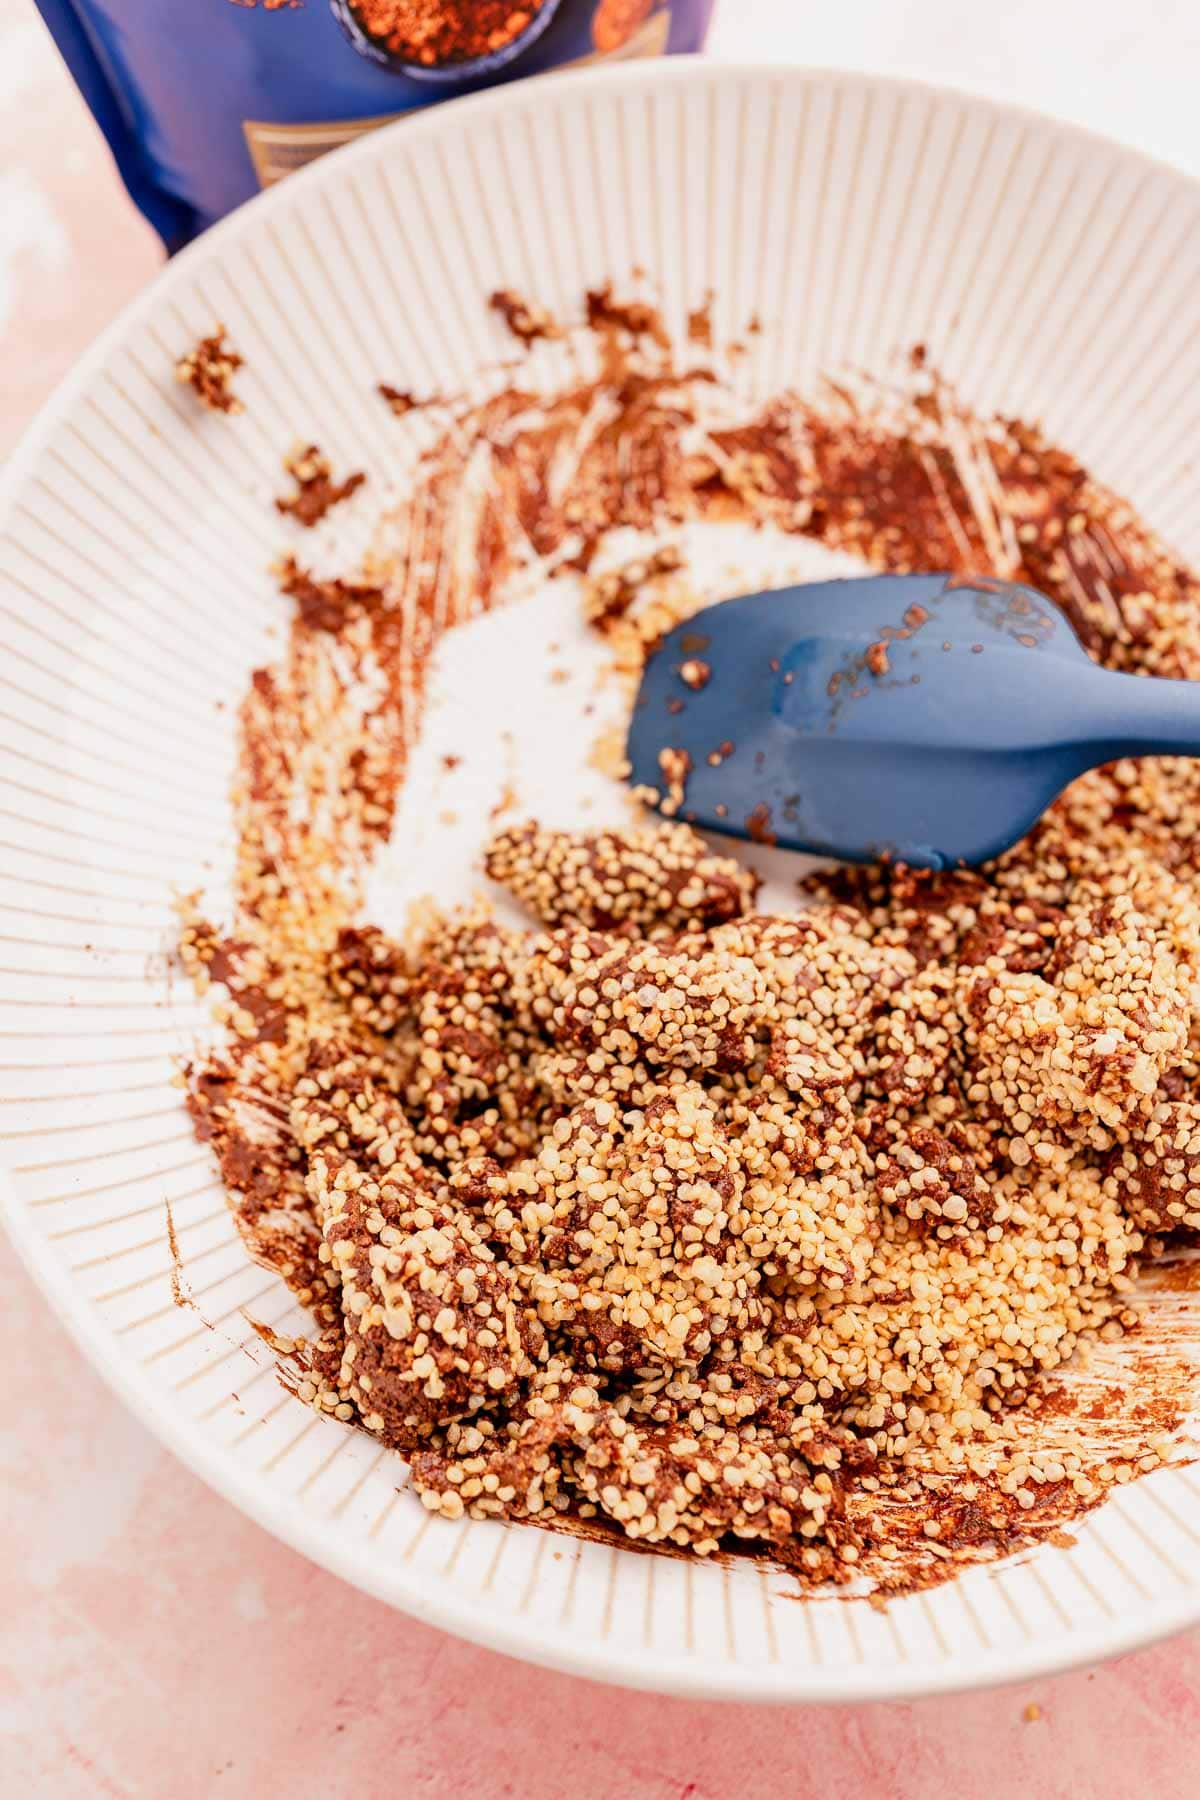 Bowl with mixed ingredients including chocolate crumbs and quinoa crunch bites, with a blue spatula.